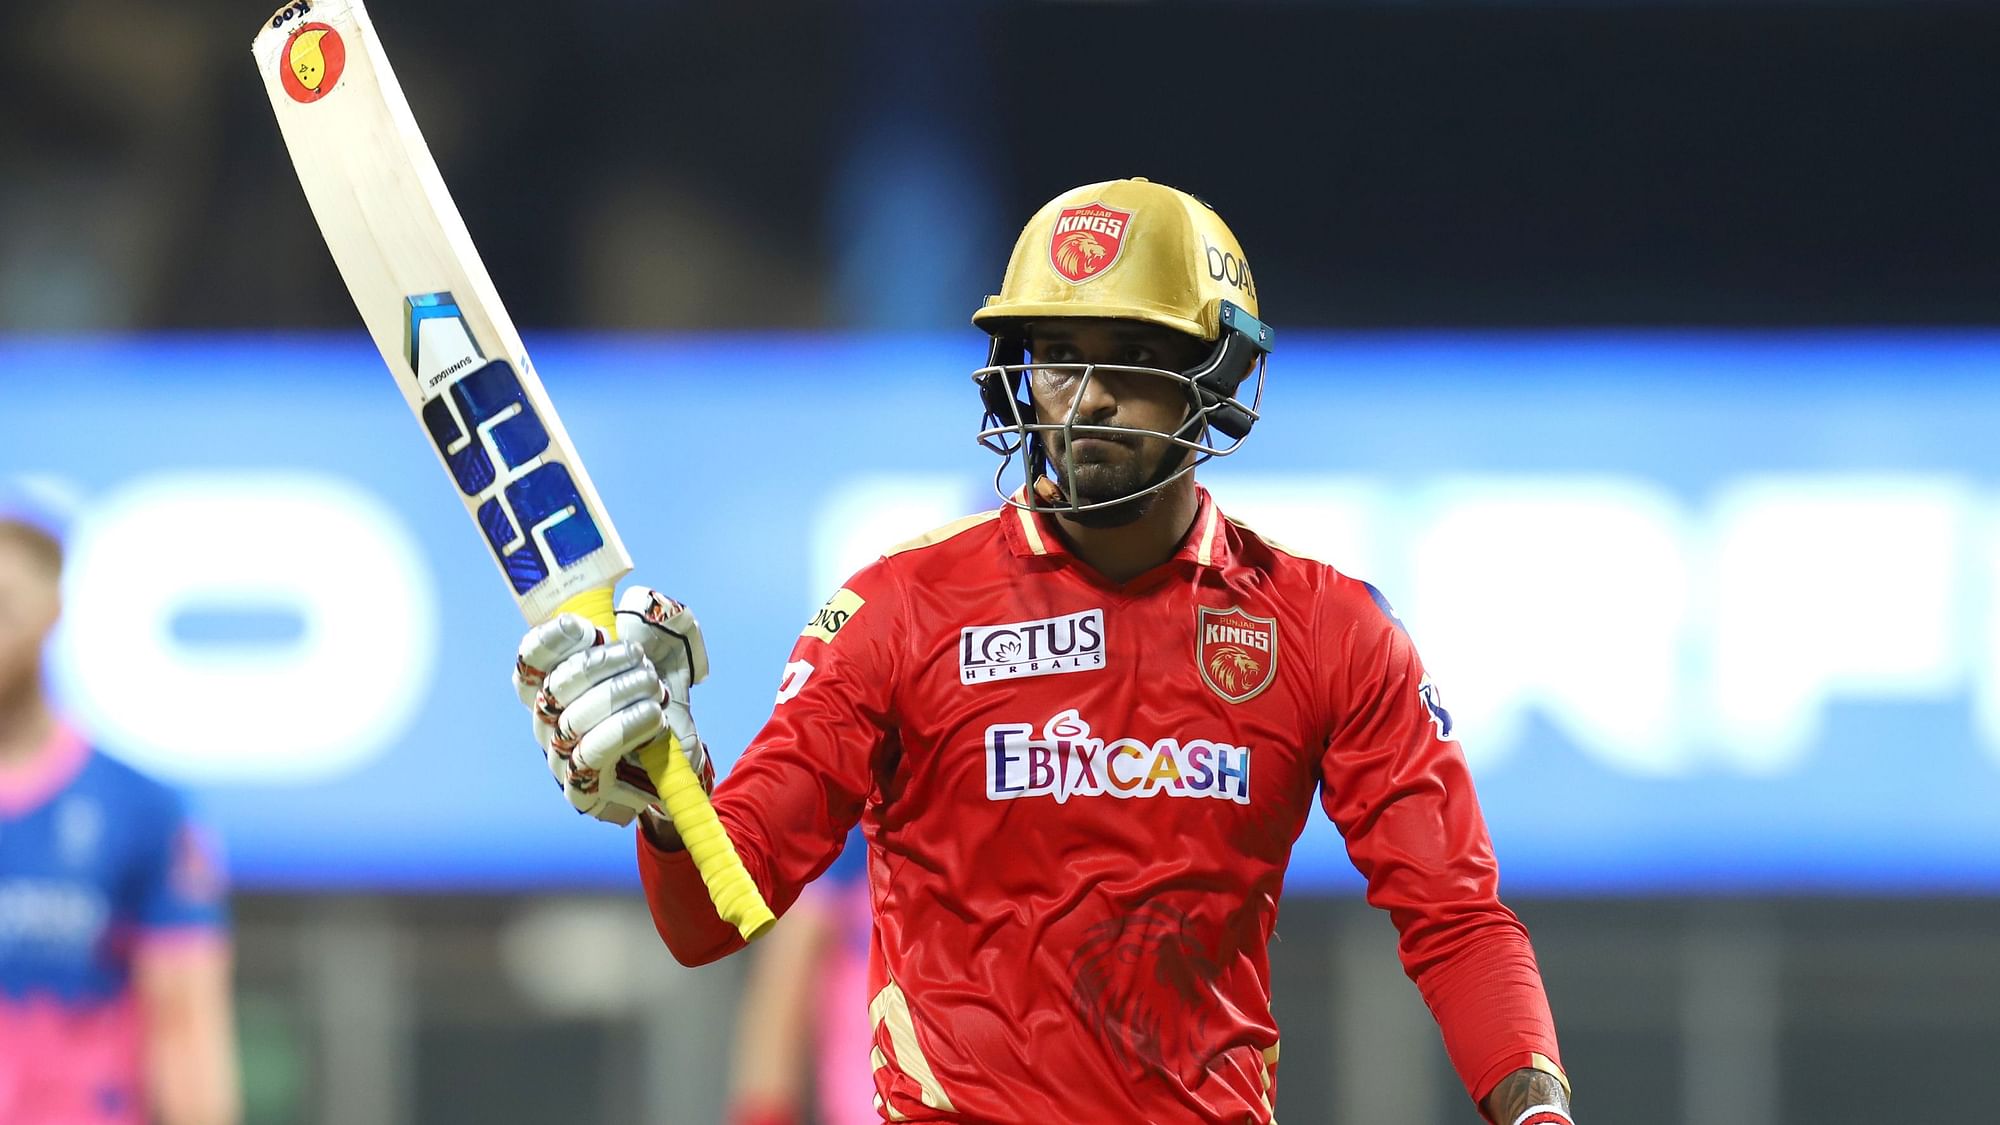 The 25-year-old scored a half century for Punjab Kings on Monday night vs RR.